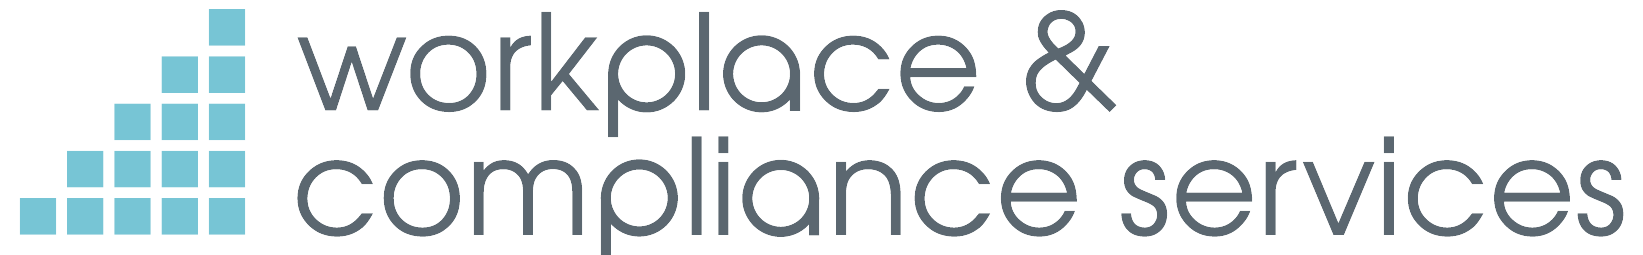 Bellrock Workplace Services service logo and name